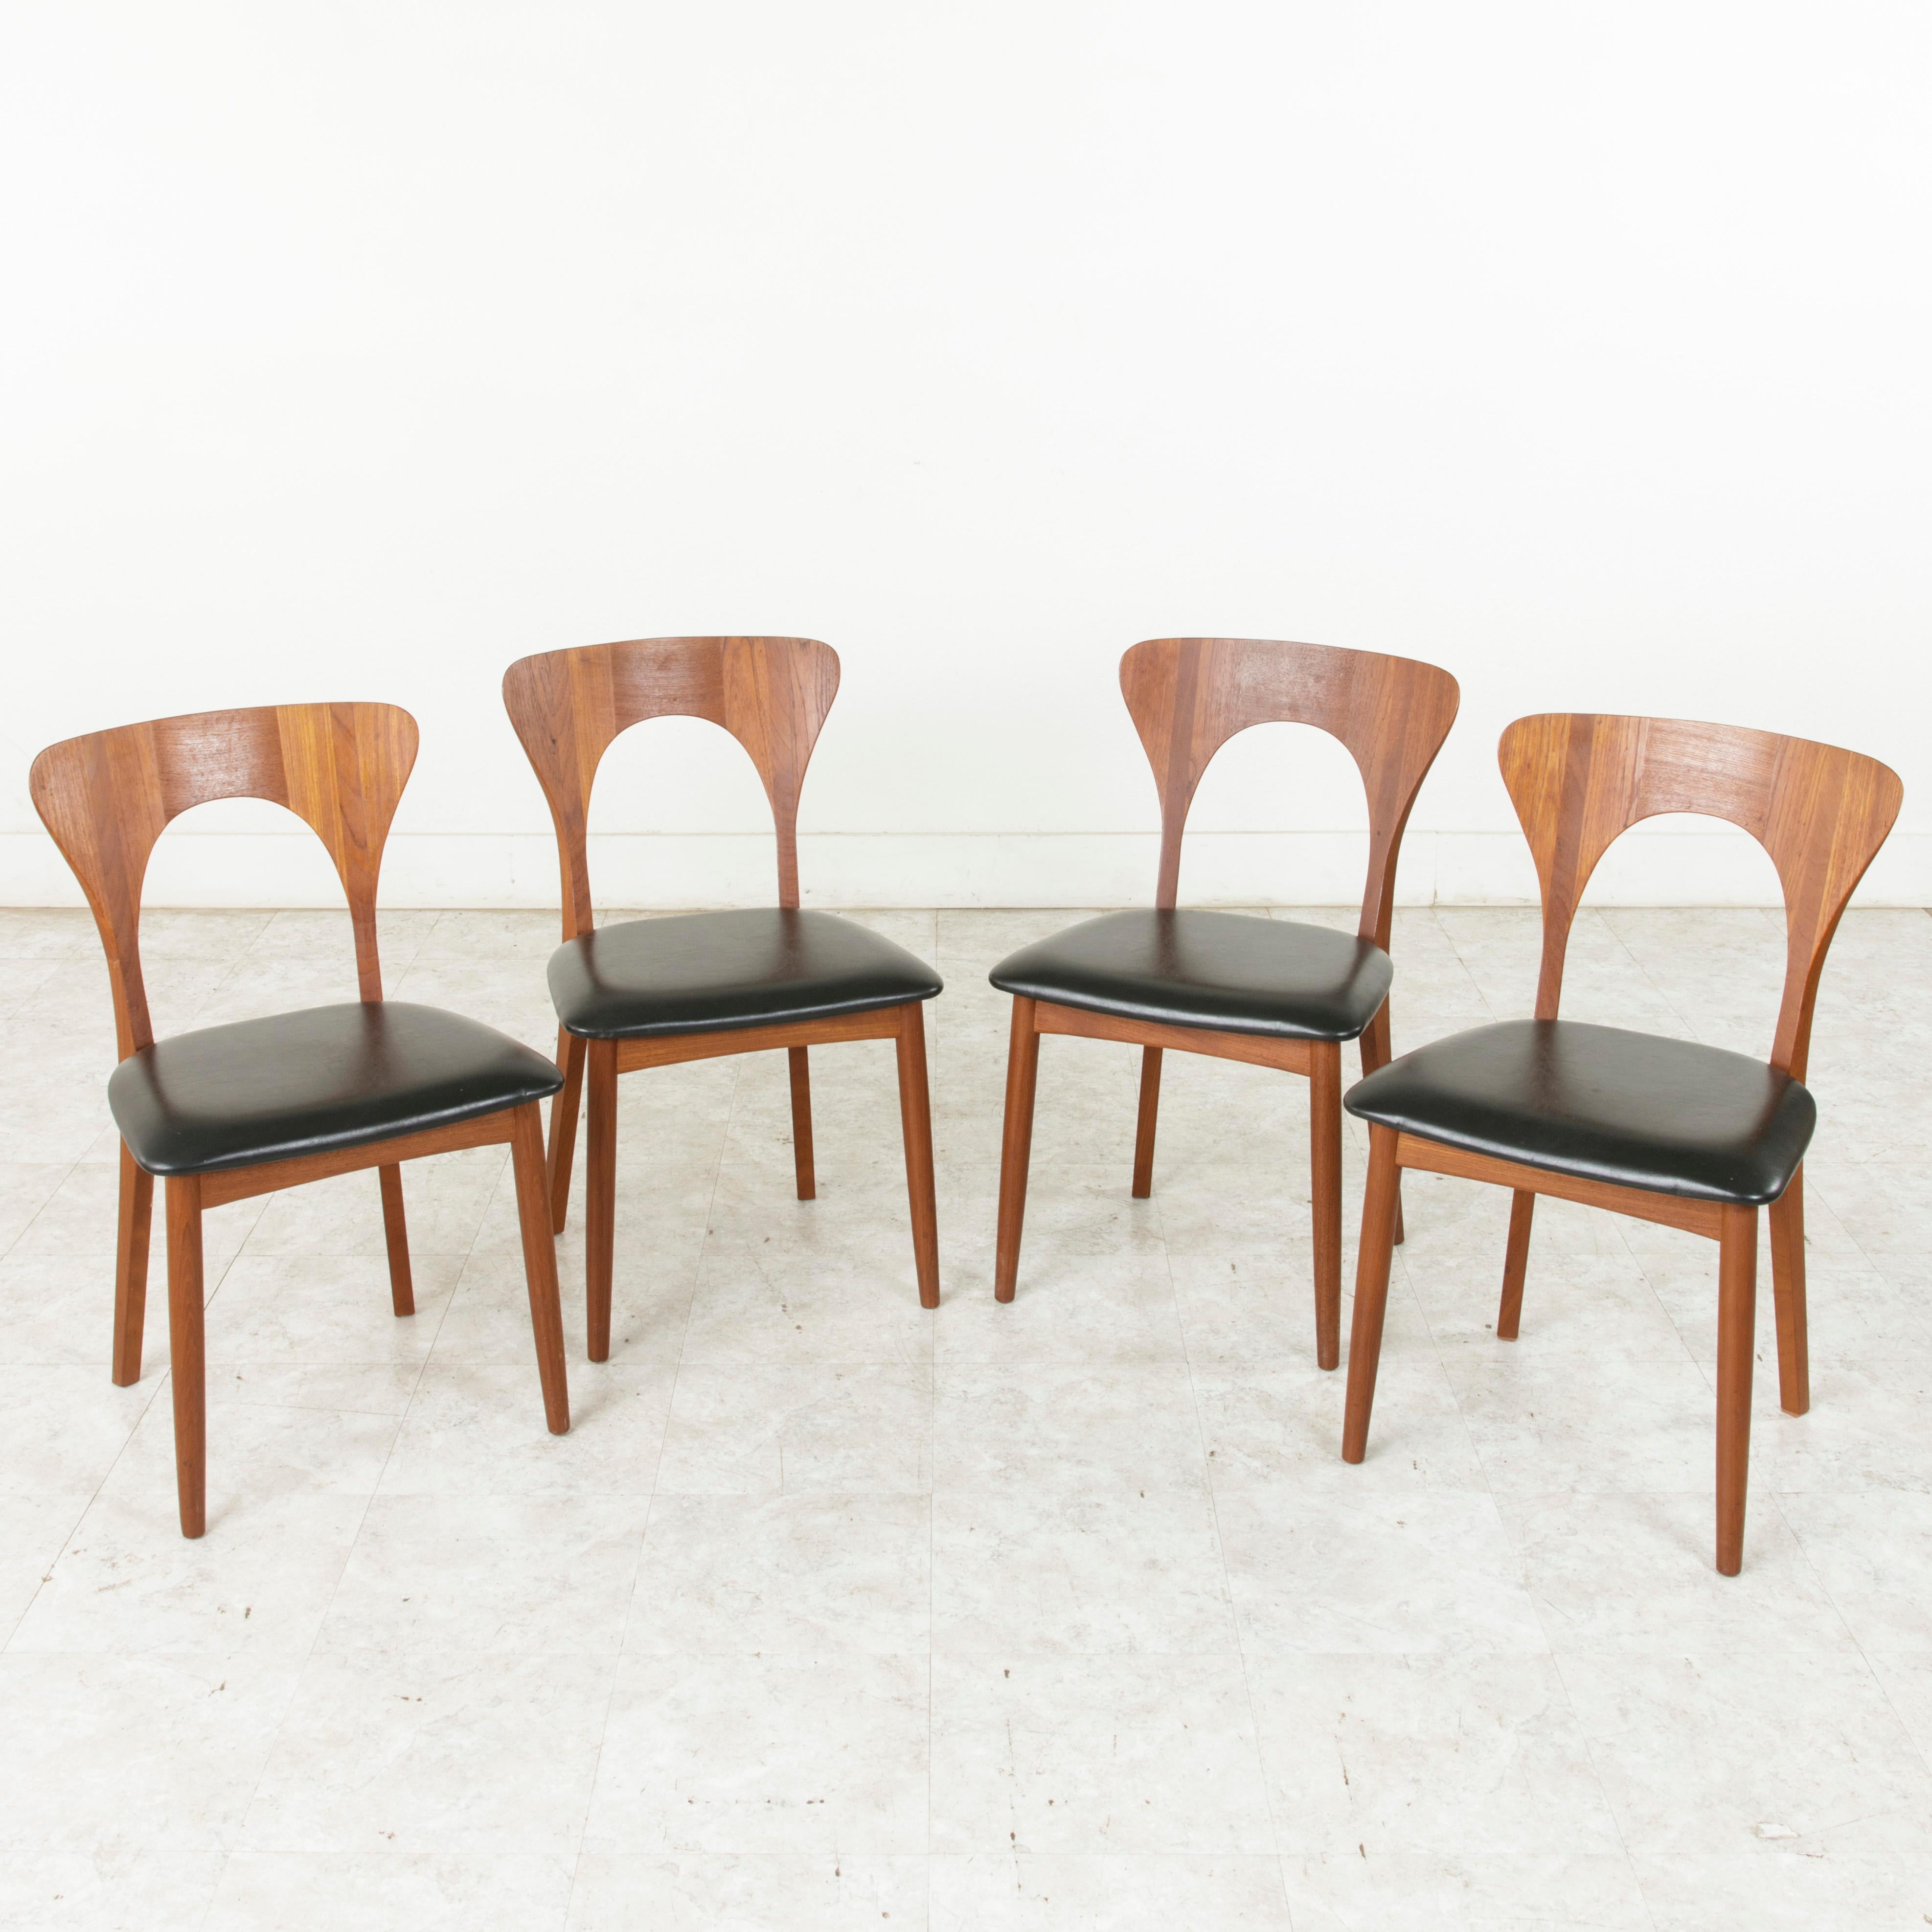 Midcentury Danish Round Teak Table and Four Chairs by Niels Koefoed, Hornslet 4